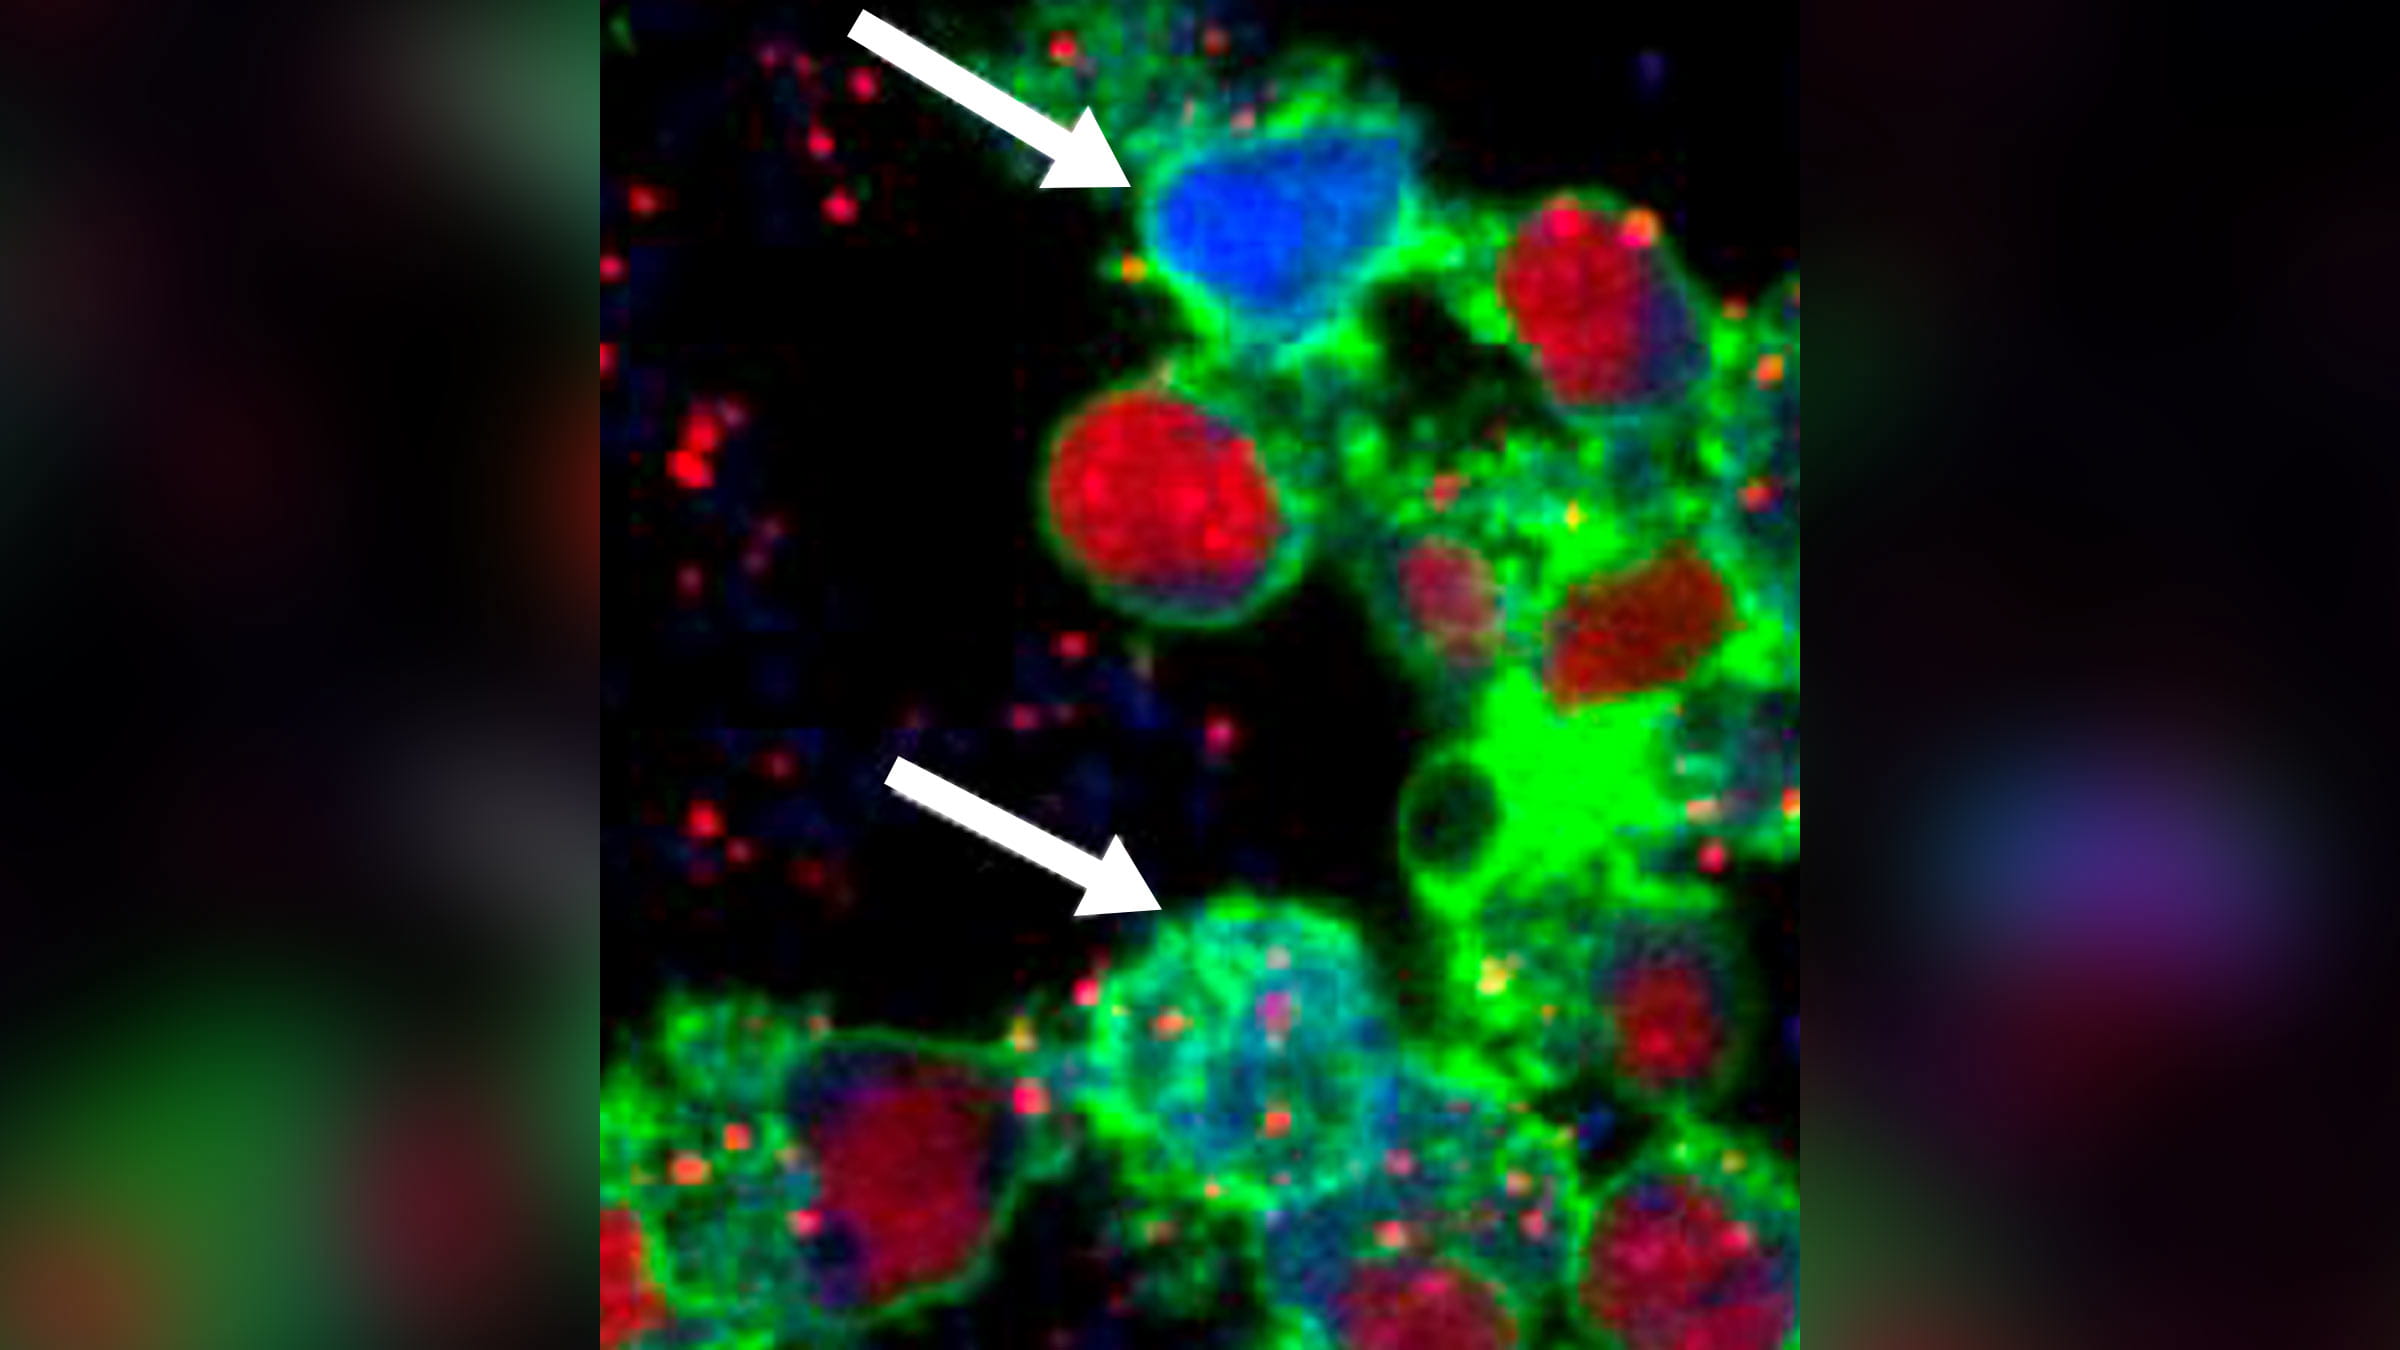 Microimaging of staph infection in white blood cells